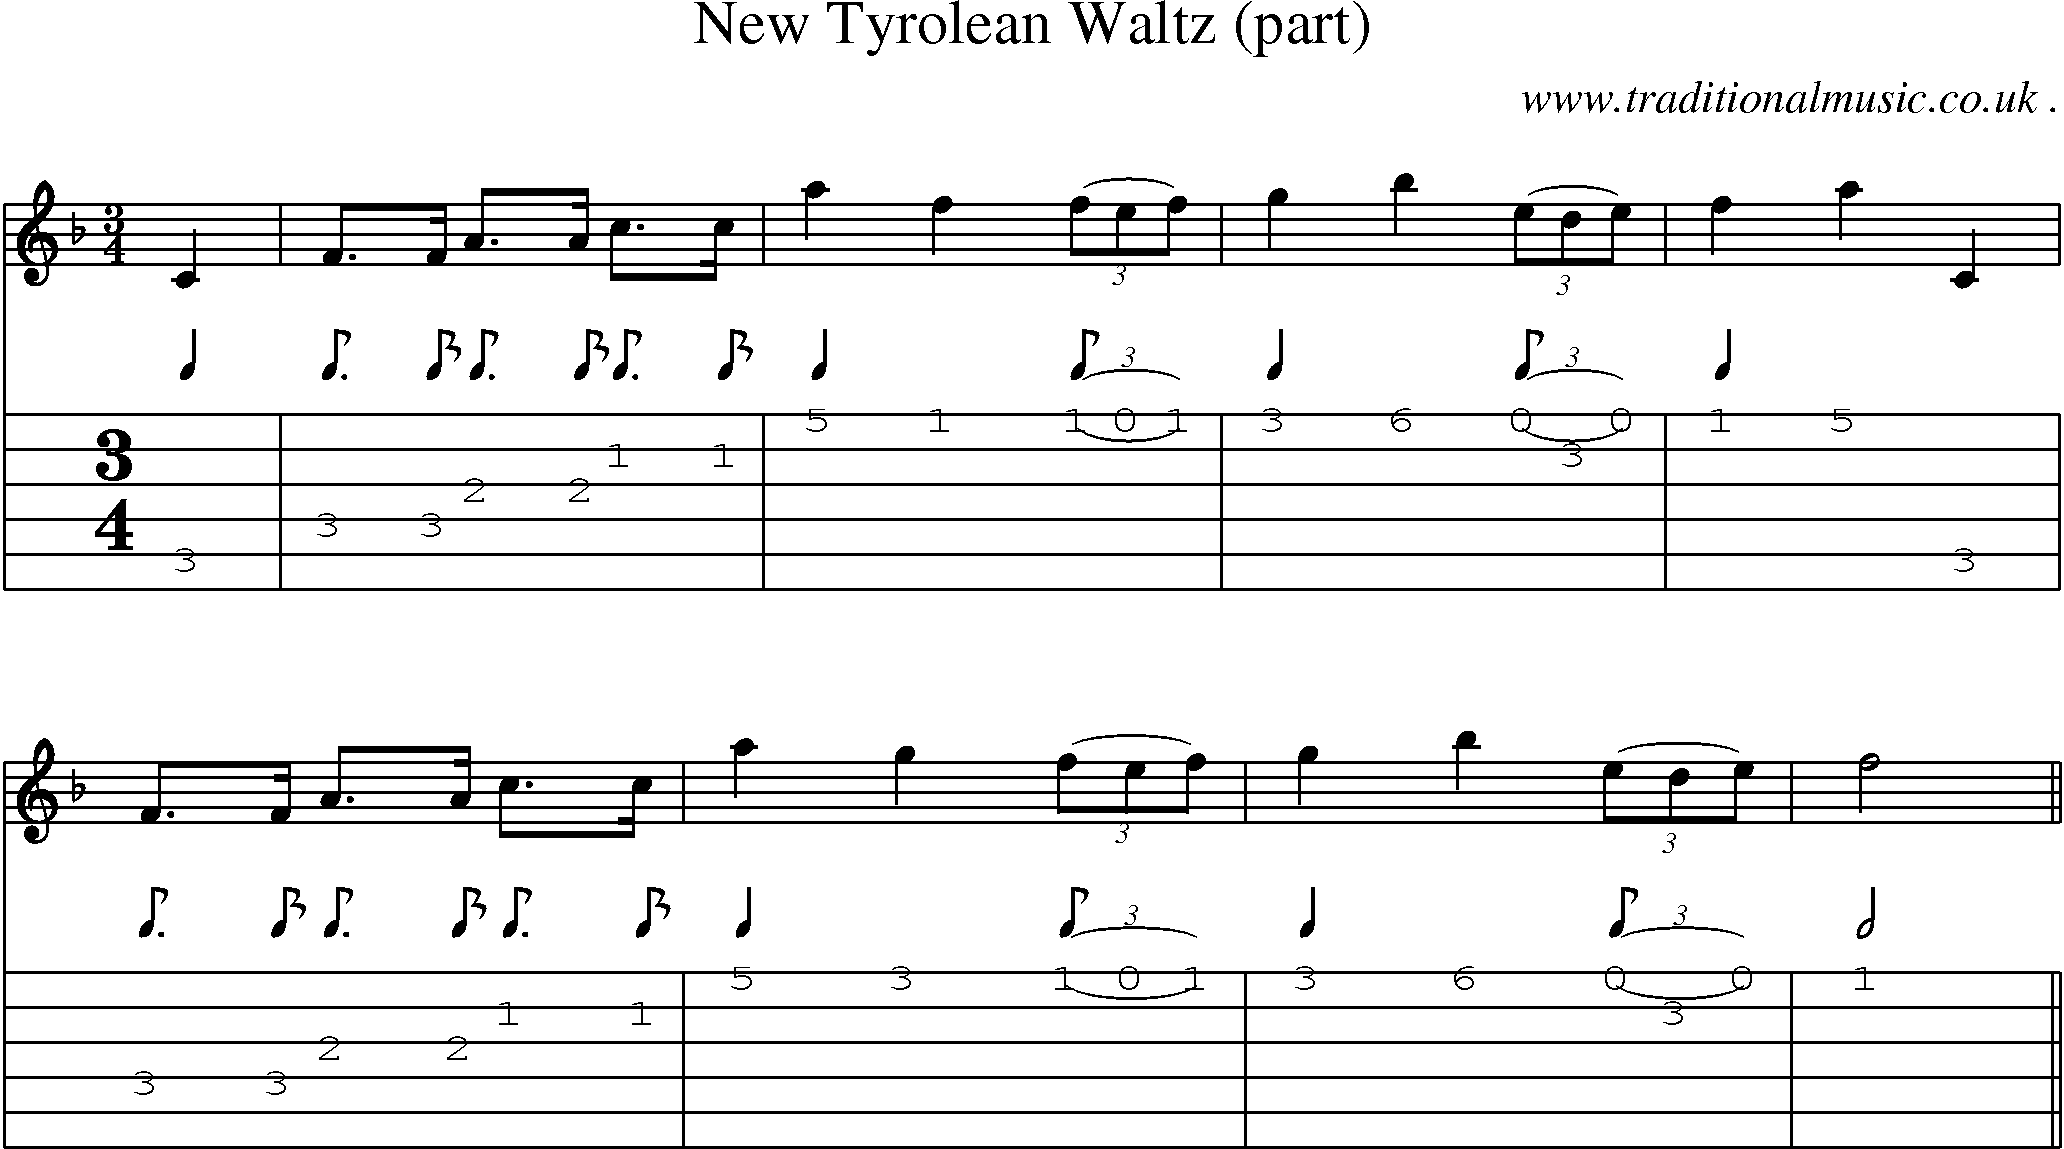 Sheet-Music and Guitar Tabs for New Tyrolean Waltz (part)